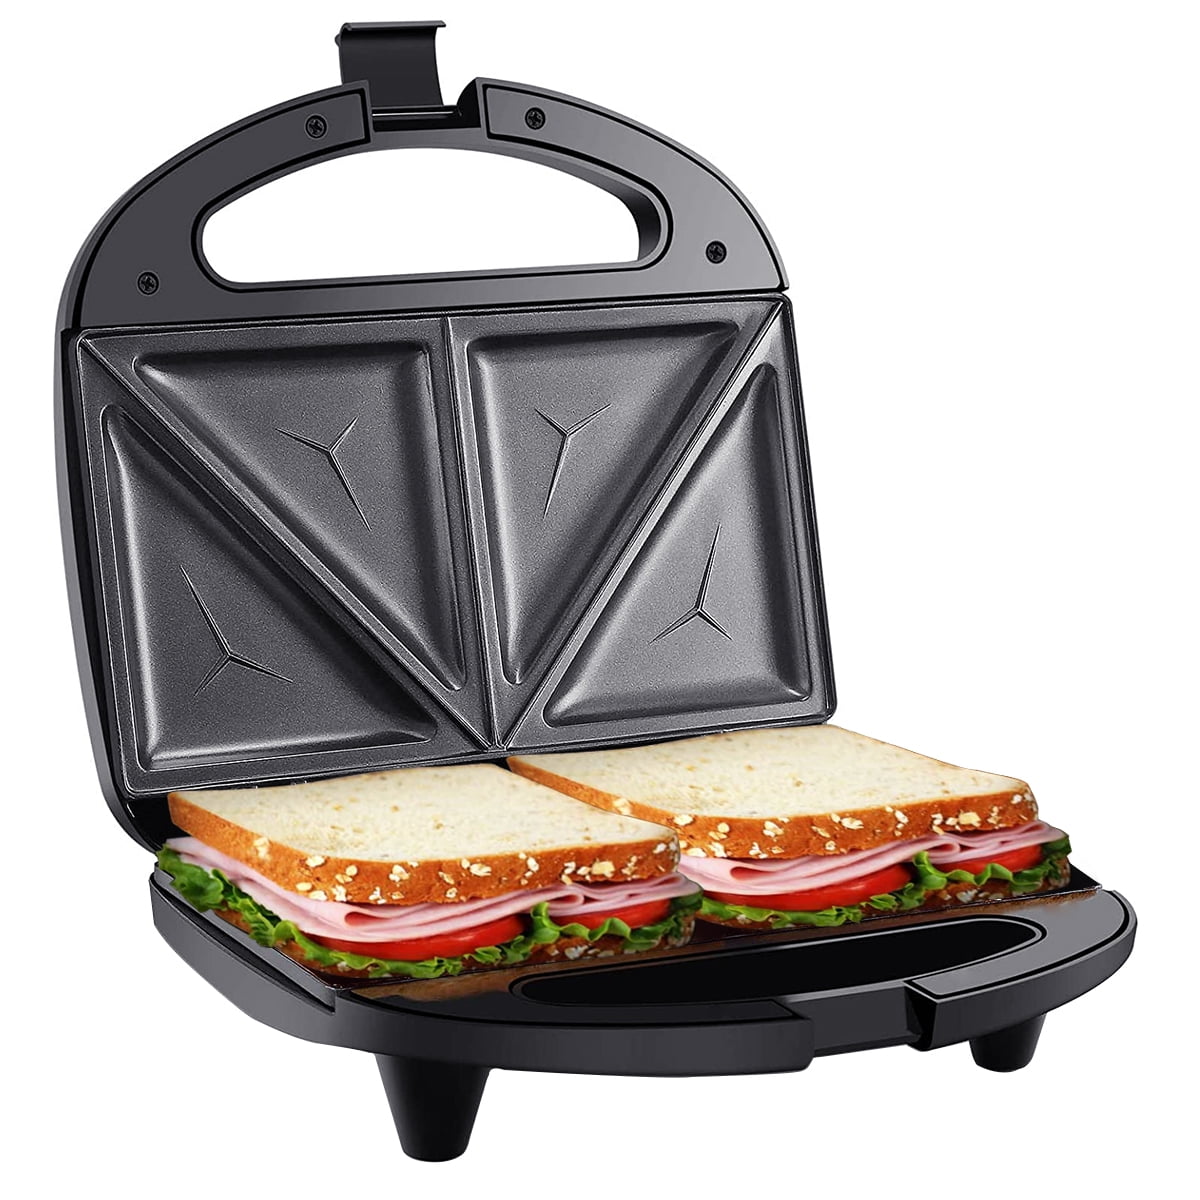 Toasted Sandwich Maker Non-stick Grilled Sandwich Panini Maker With  Insulated Handle Hot Sandwich Maker Grilled Cheese Machine - AliExpress